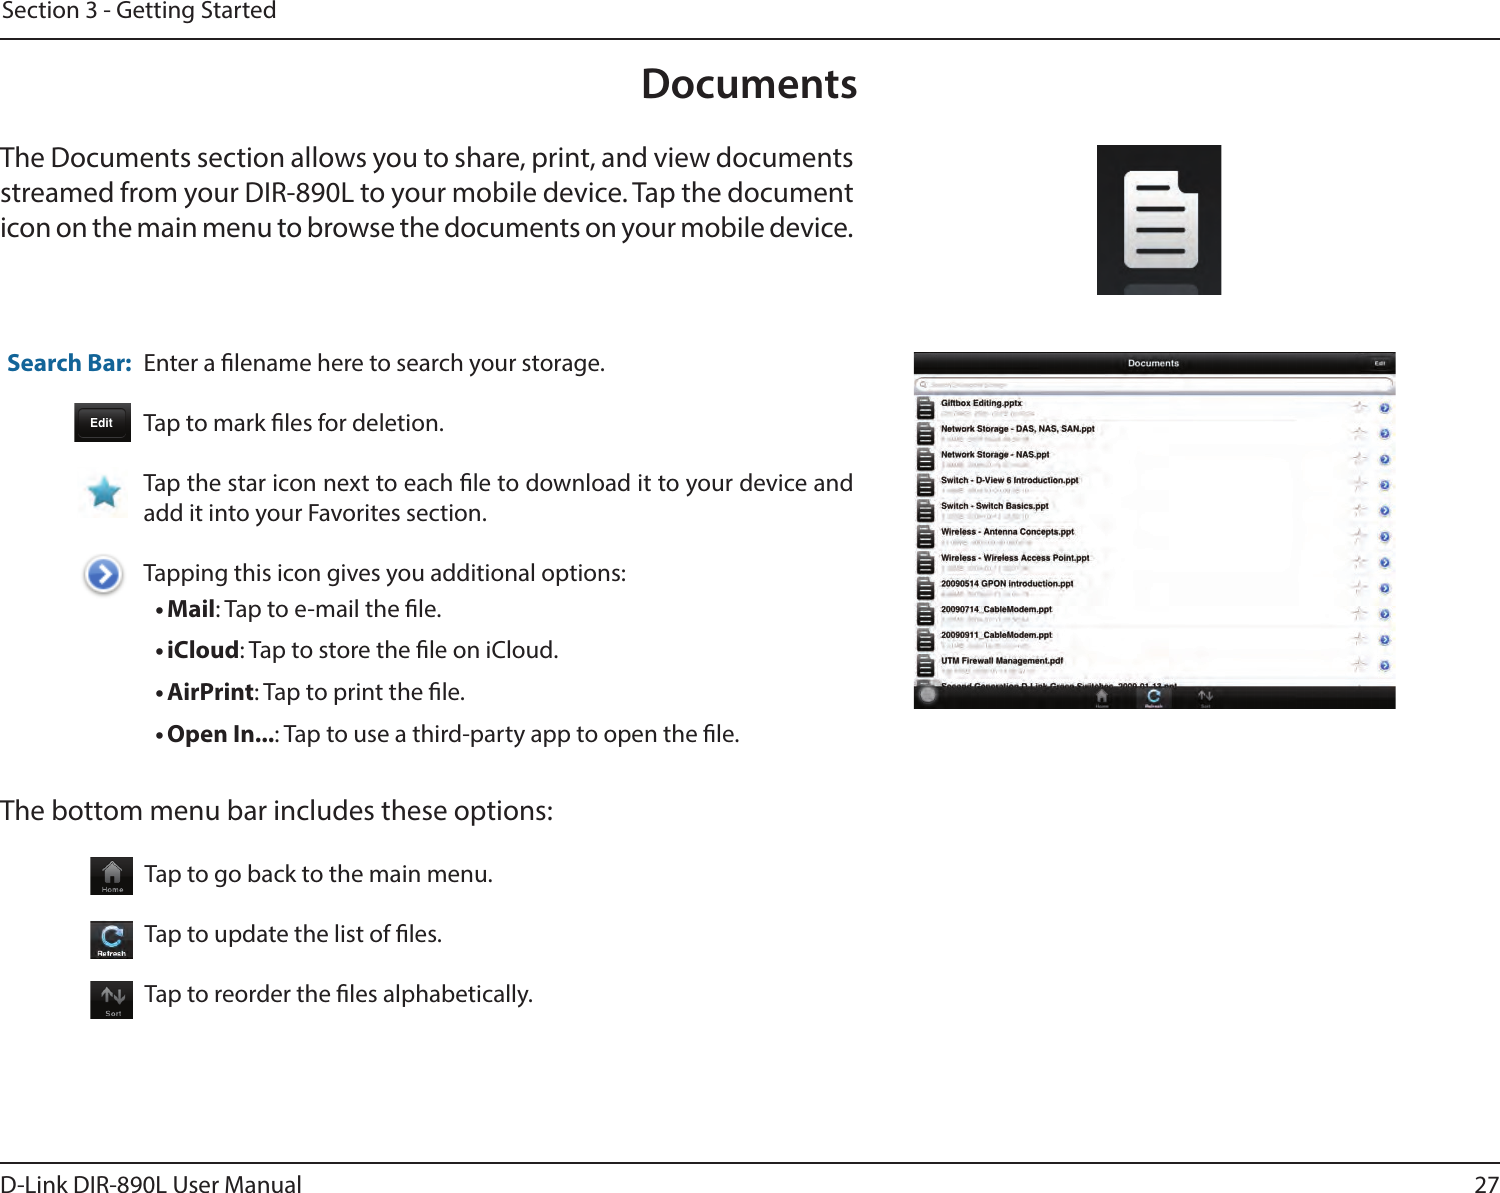 27D-Link DIR-890L User ManualSection 3 - Getting StartedDocumentsThe Documents section allows you to share, print, and view documents streamed from your DIR-890L to your mobile device. Tap the document icon on the main menu to browse the documents on your mobile device.Enter a lename here to search your storage.Tap to mark les for deletion.Tap the star icon next to each le to download it to your device and add it into your Favorites section.Tapping this icon gives you additional options:• Mail: Tap to e-mail the le.• iCloud: Tap to store the le on iCloud.• AirPrint: Tap to print the le.• Open In...: Tap to use a third-party app to open the le.The bottom menu bar includes these options:Search Bar: Tap to go back to the main menu.Tap to update the list of les.Tap to reorder the les alphabetically.